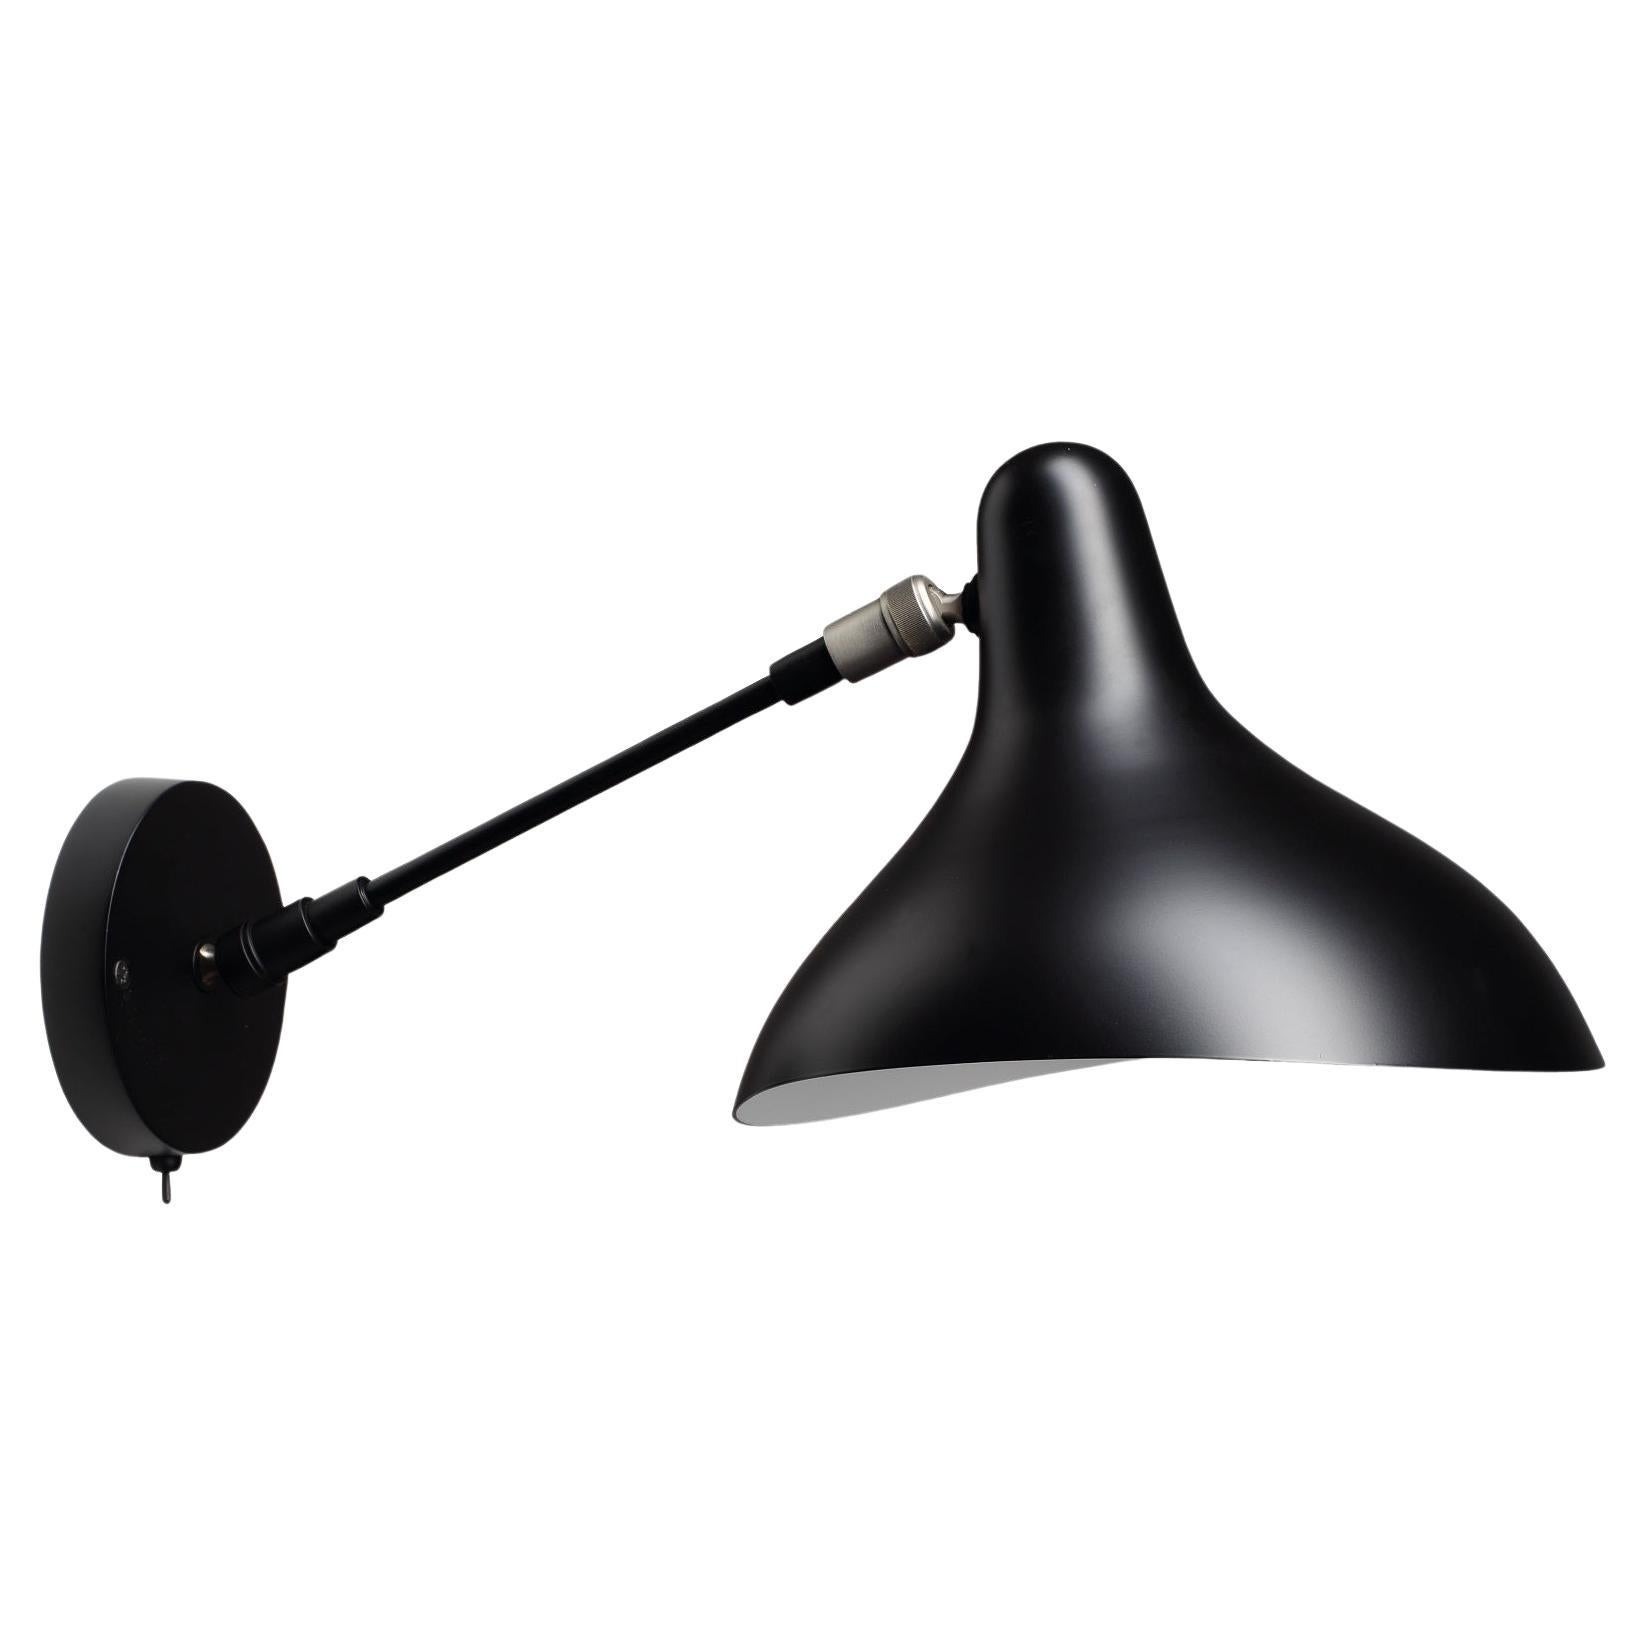 DCW Editions Mantis BS5 SW Wall Lamp in Black Steel and Aluminum For Sale